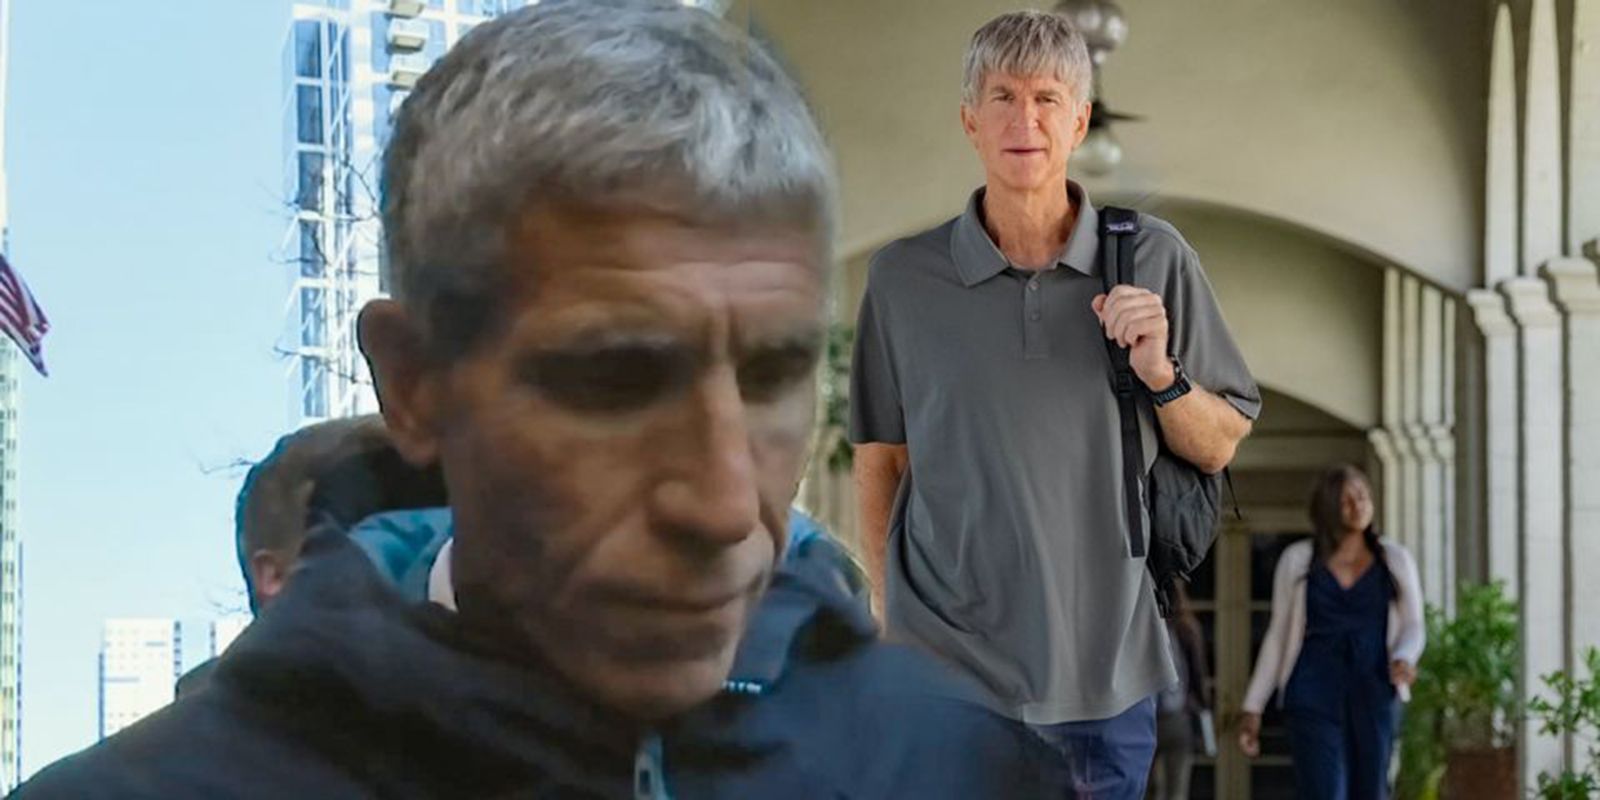 RIck Singer collage of images from Operation Varsity Blues The College Admissions Scandal